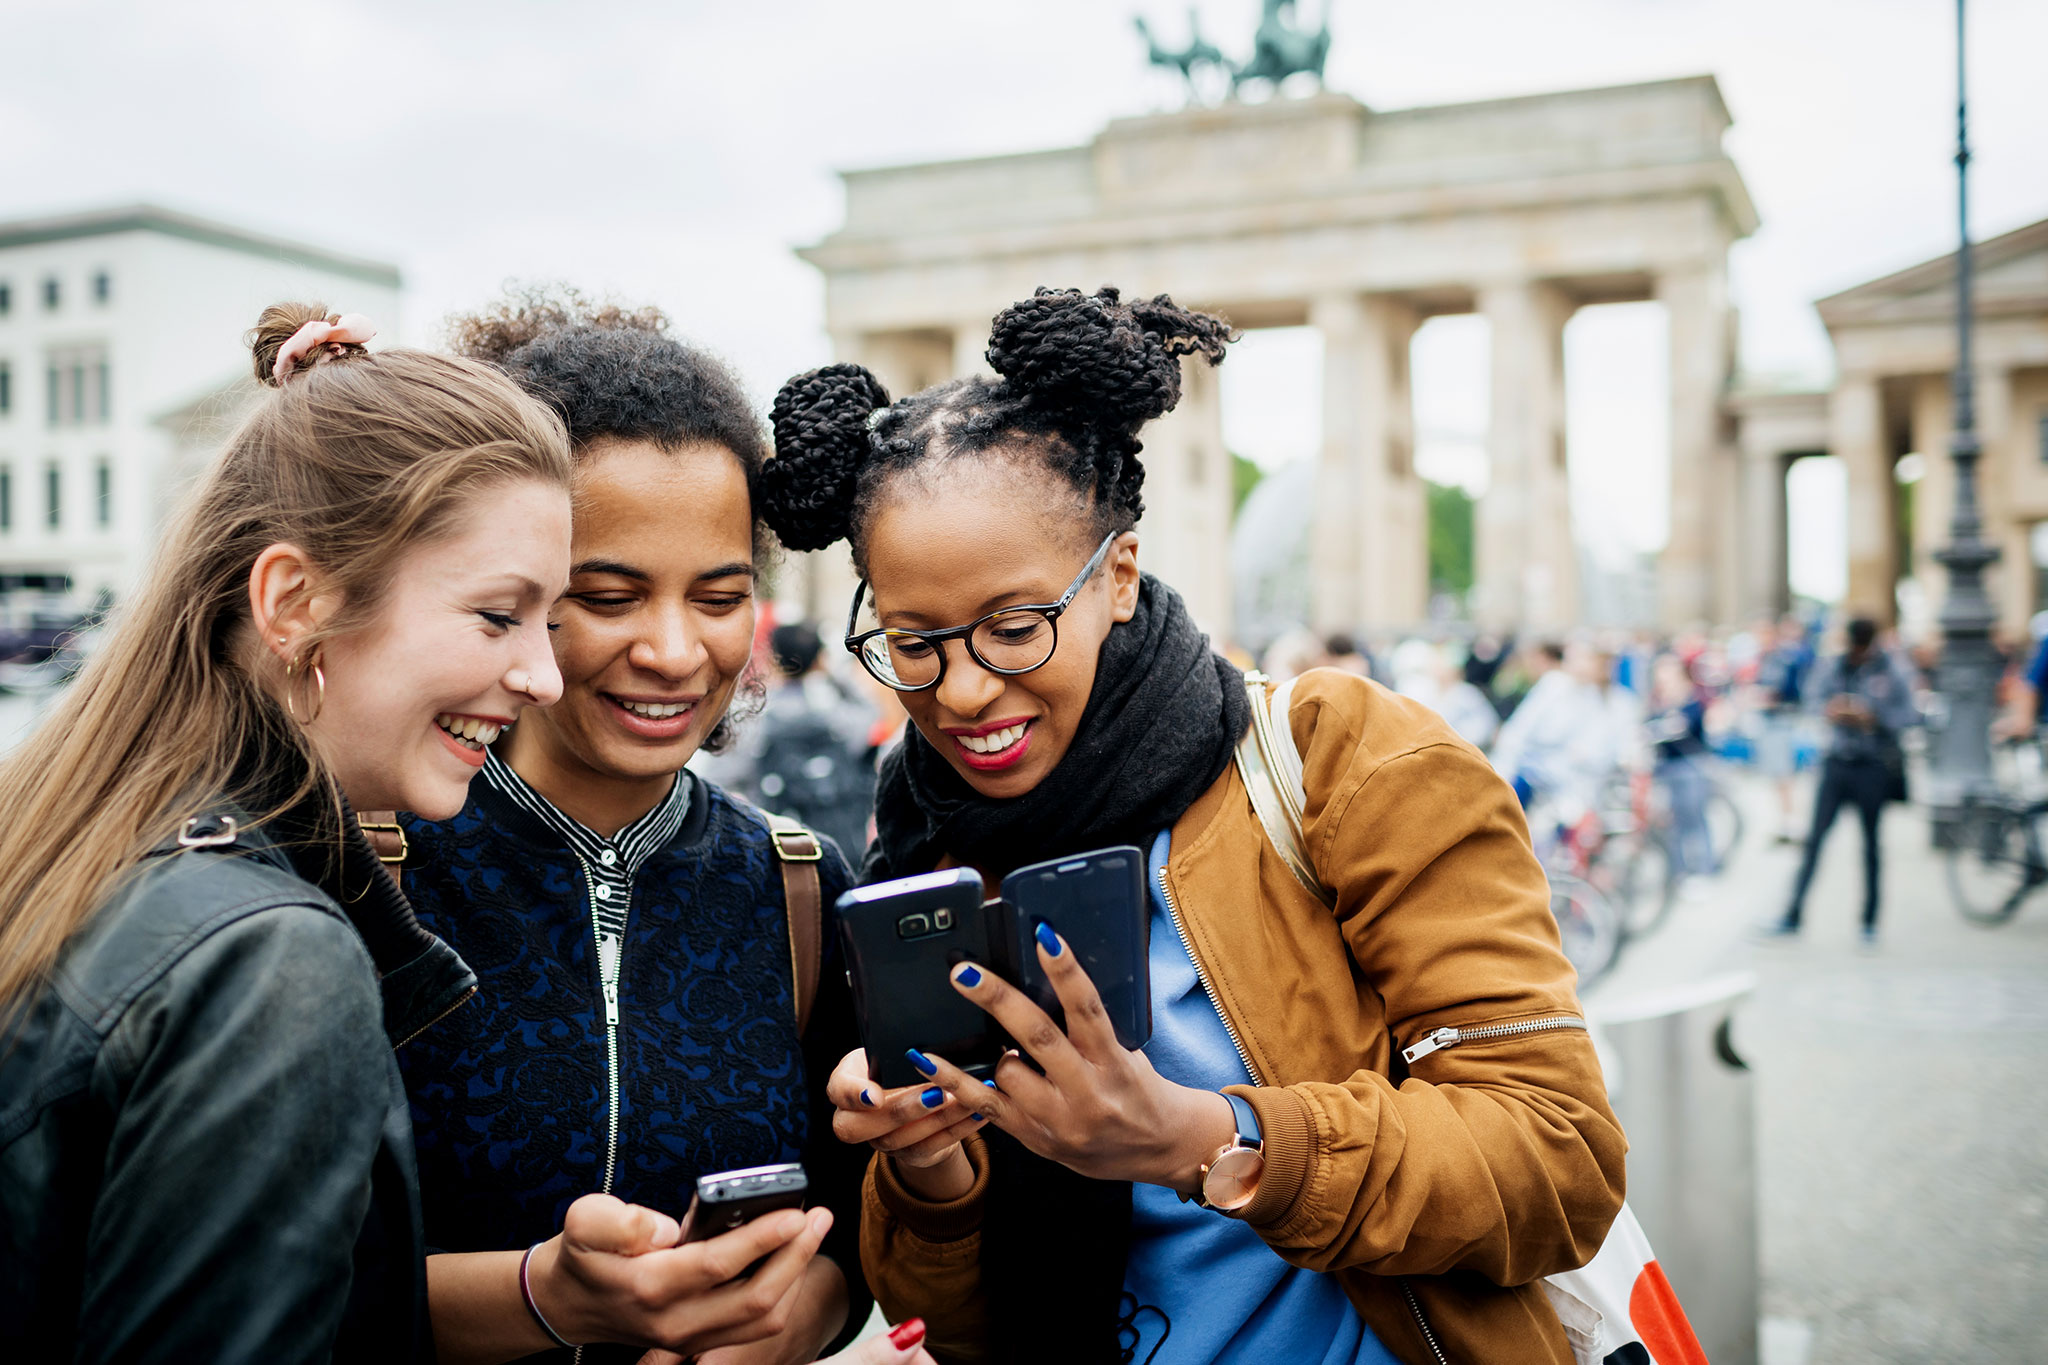 Three young women visiting Berlin stop to look over recent photos on their phones.